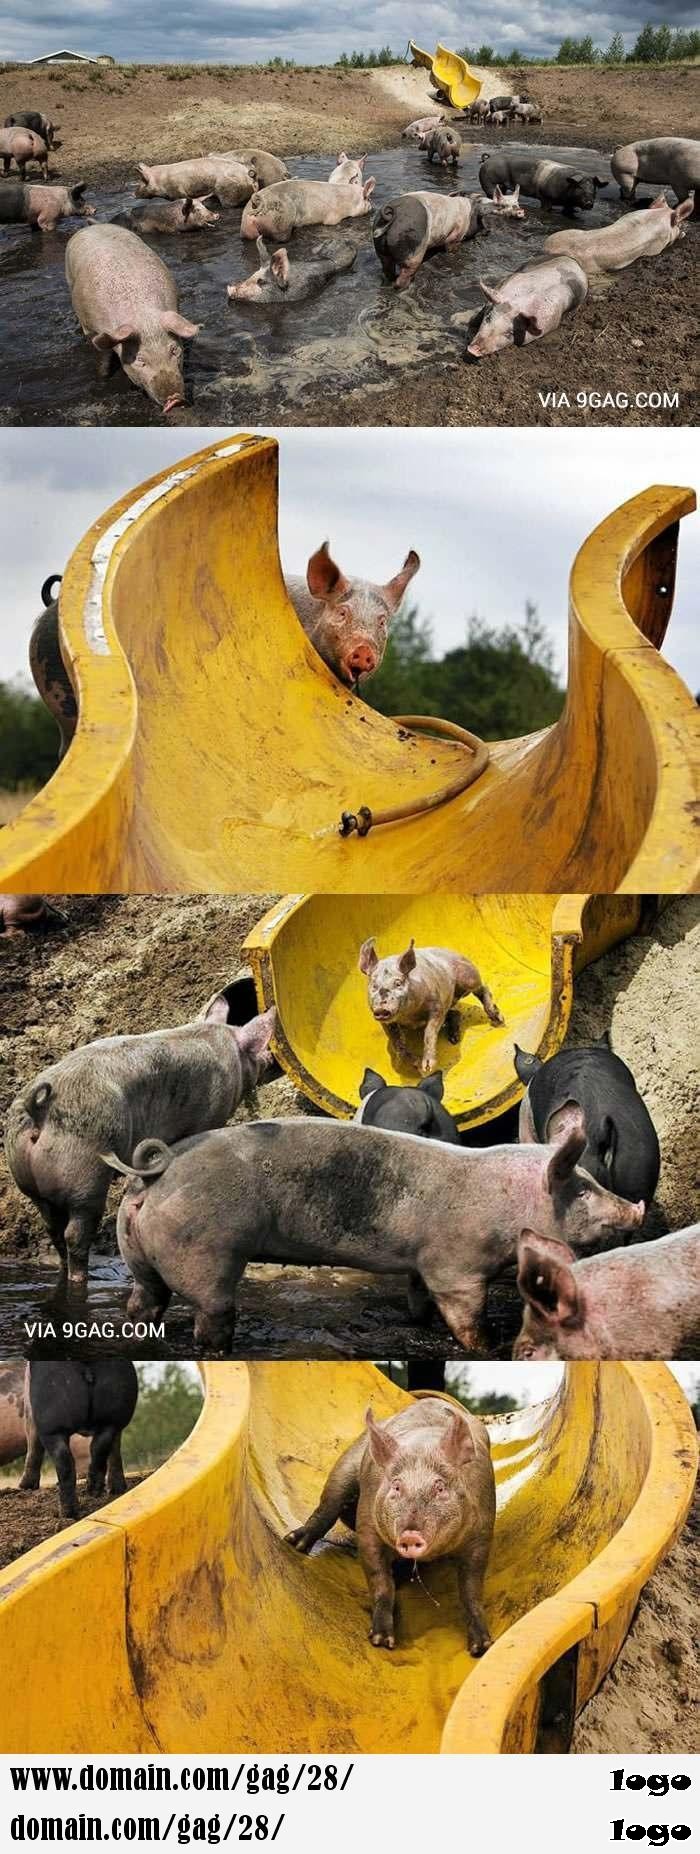 Oh look even pigs have more fun than I do